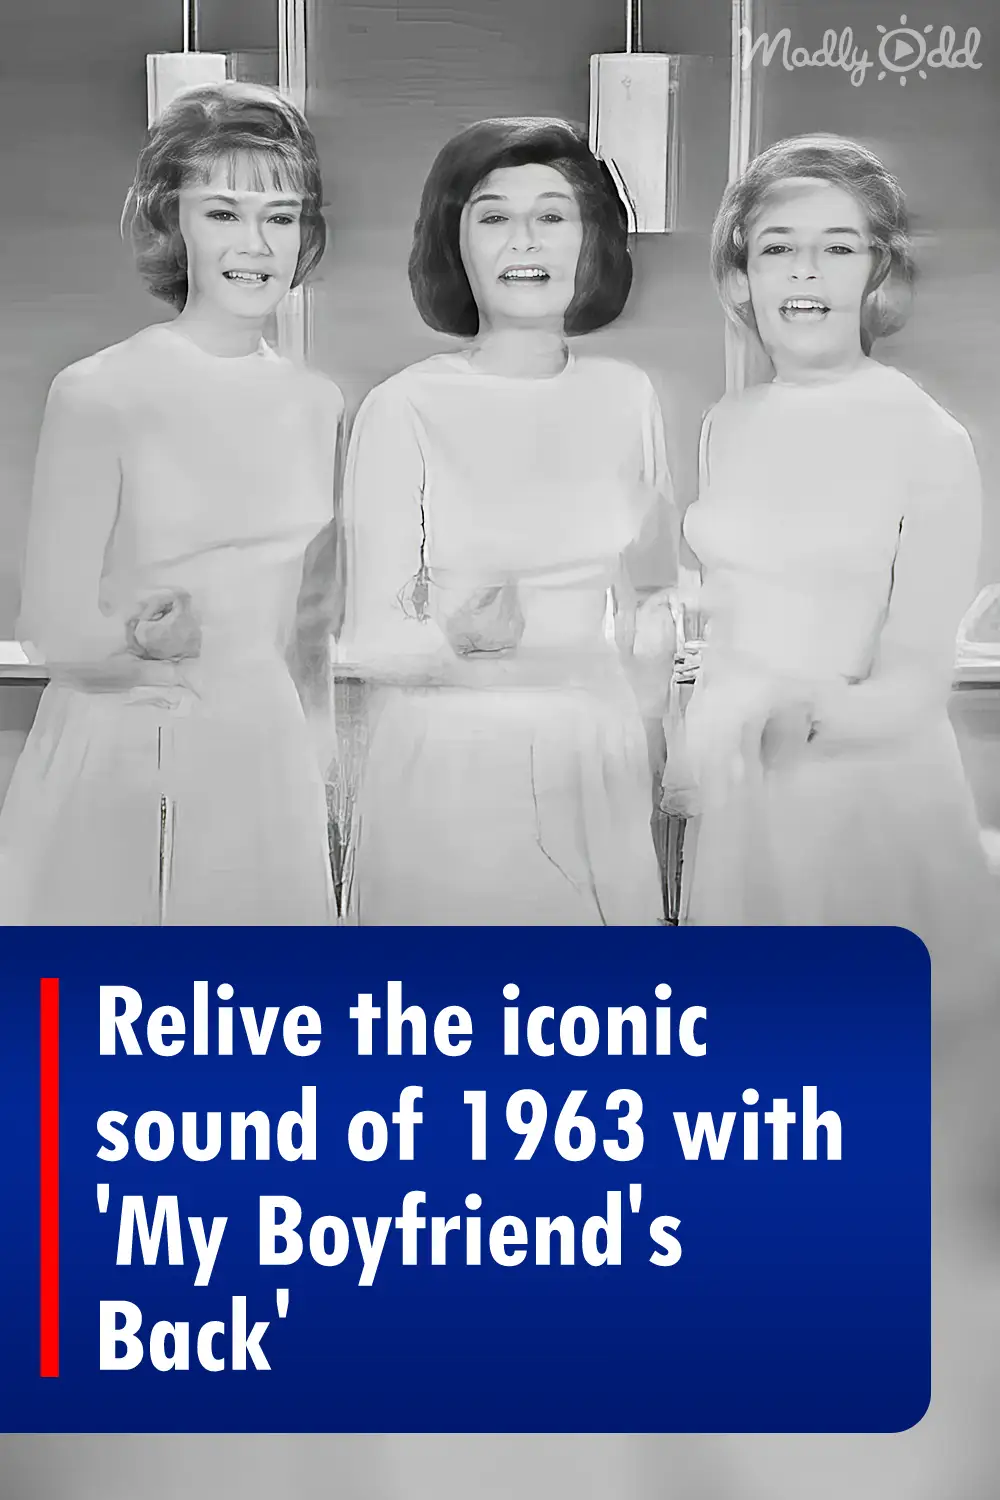 Relive the iconic sound of 1963 with 'My Boyfriend's Back'